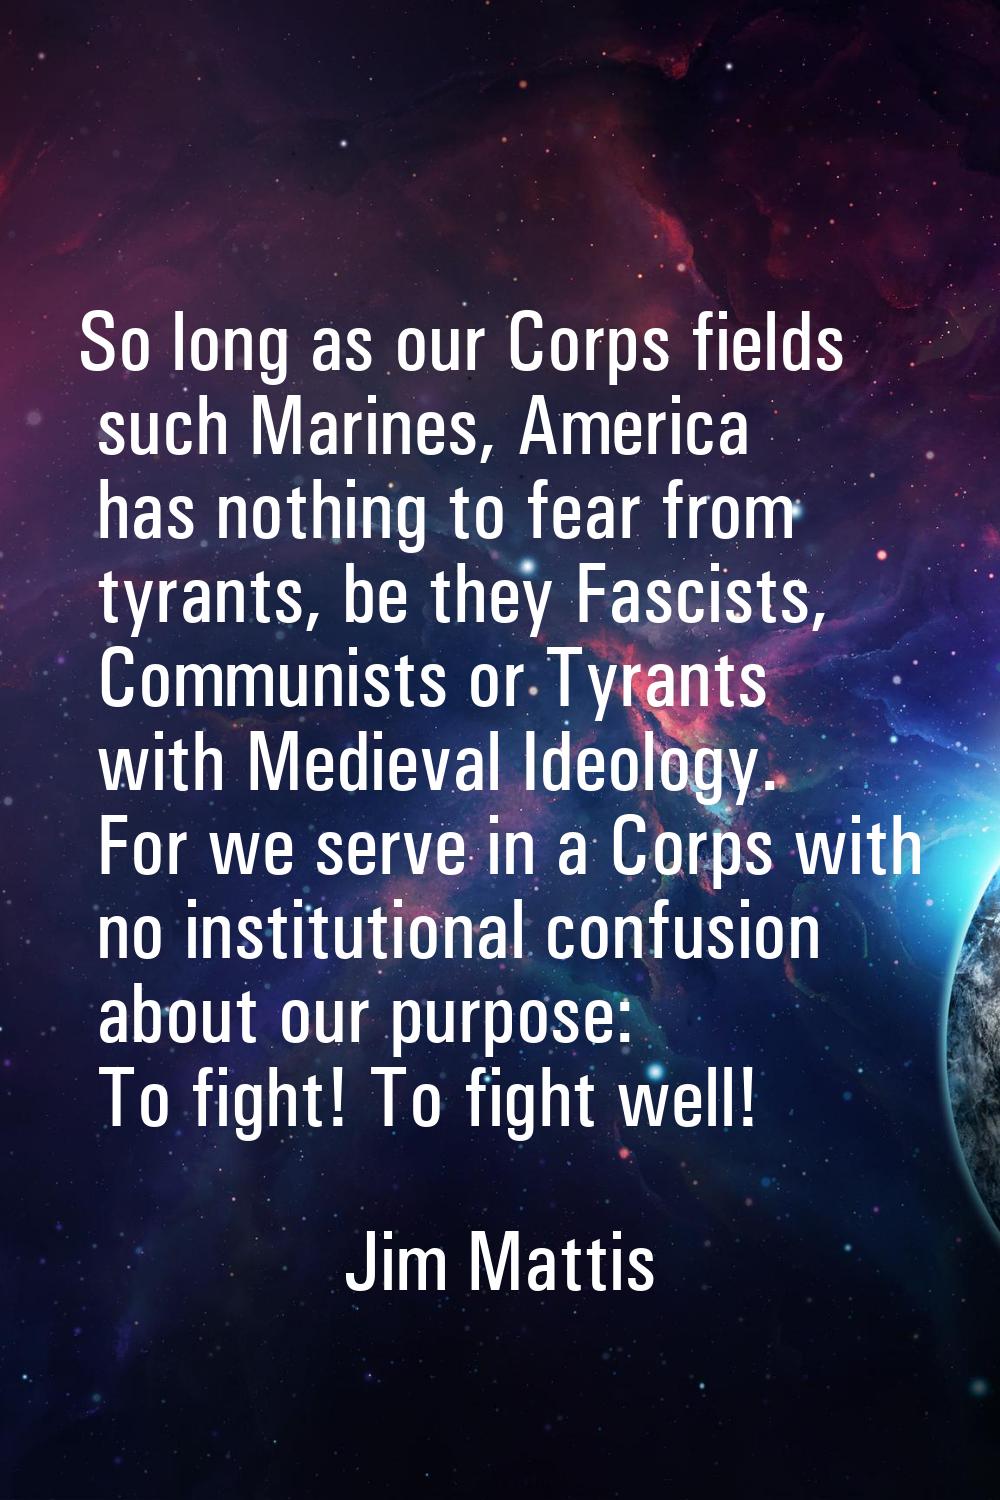 So long as our Corps fields such Marines, America has nothing to fear from tyrants, be they Fascist